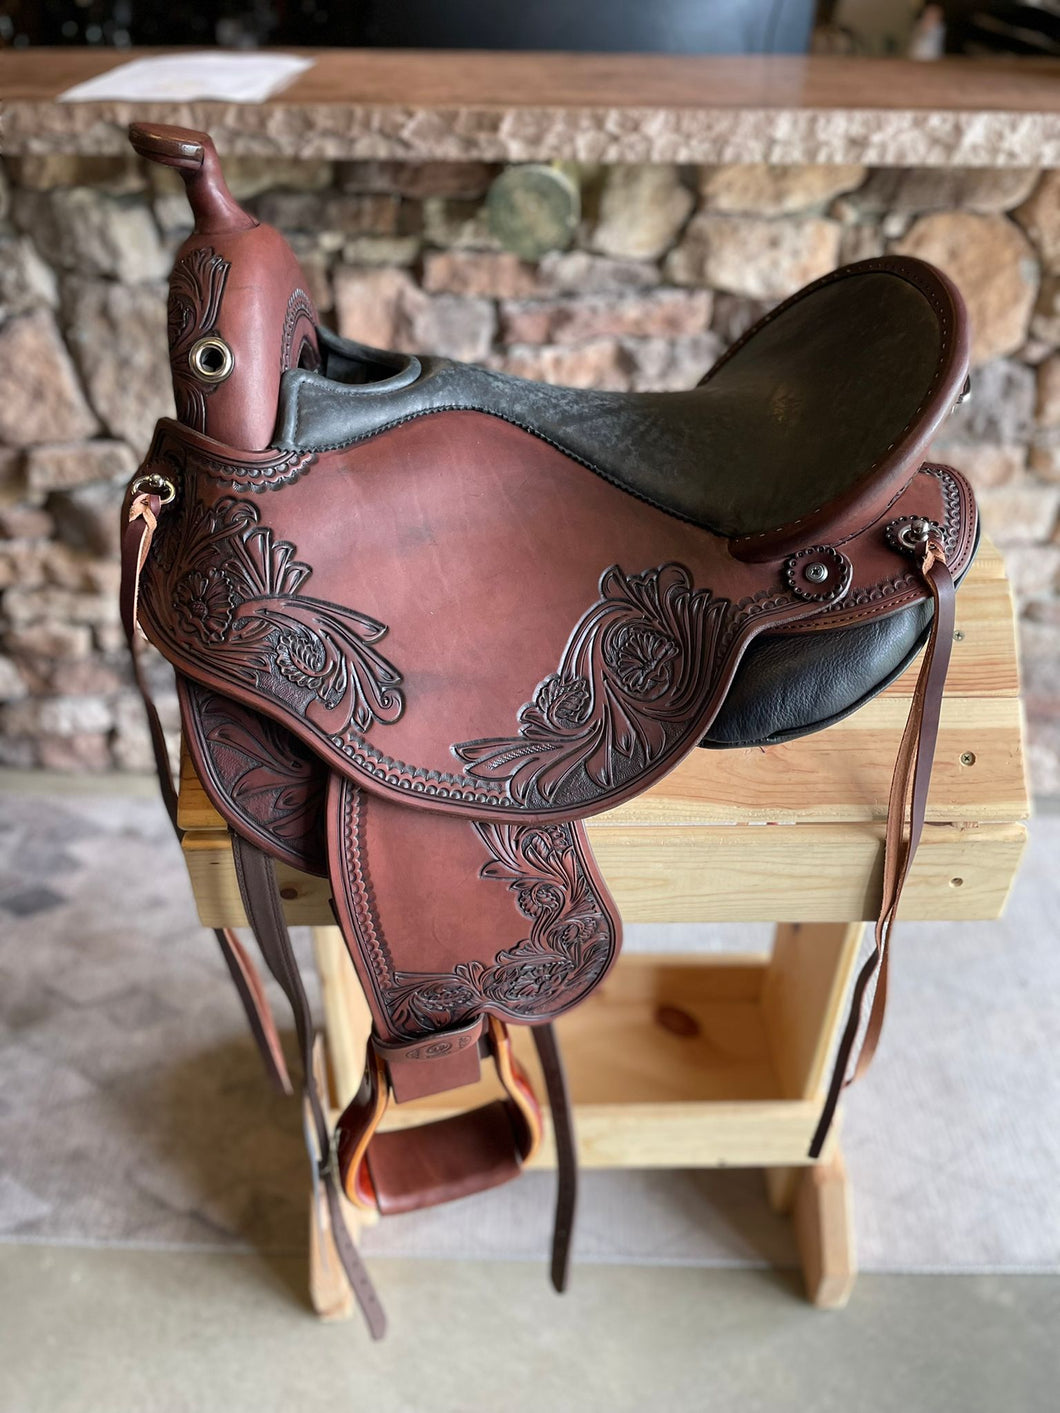 dp saddlery quantum short & light with a western dressage seat 4954, side view on wooden saddle rack 